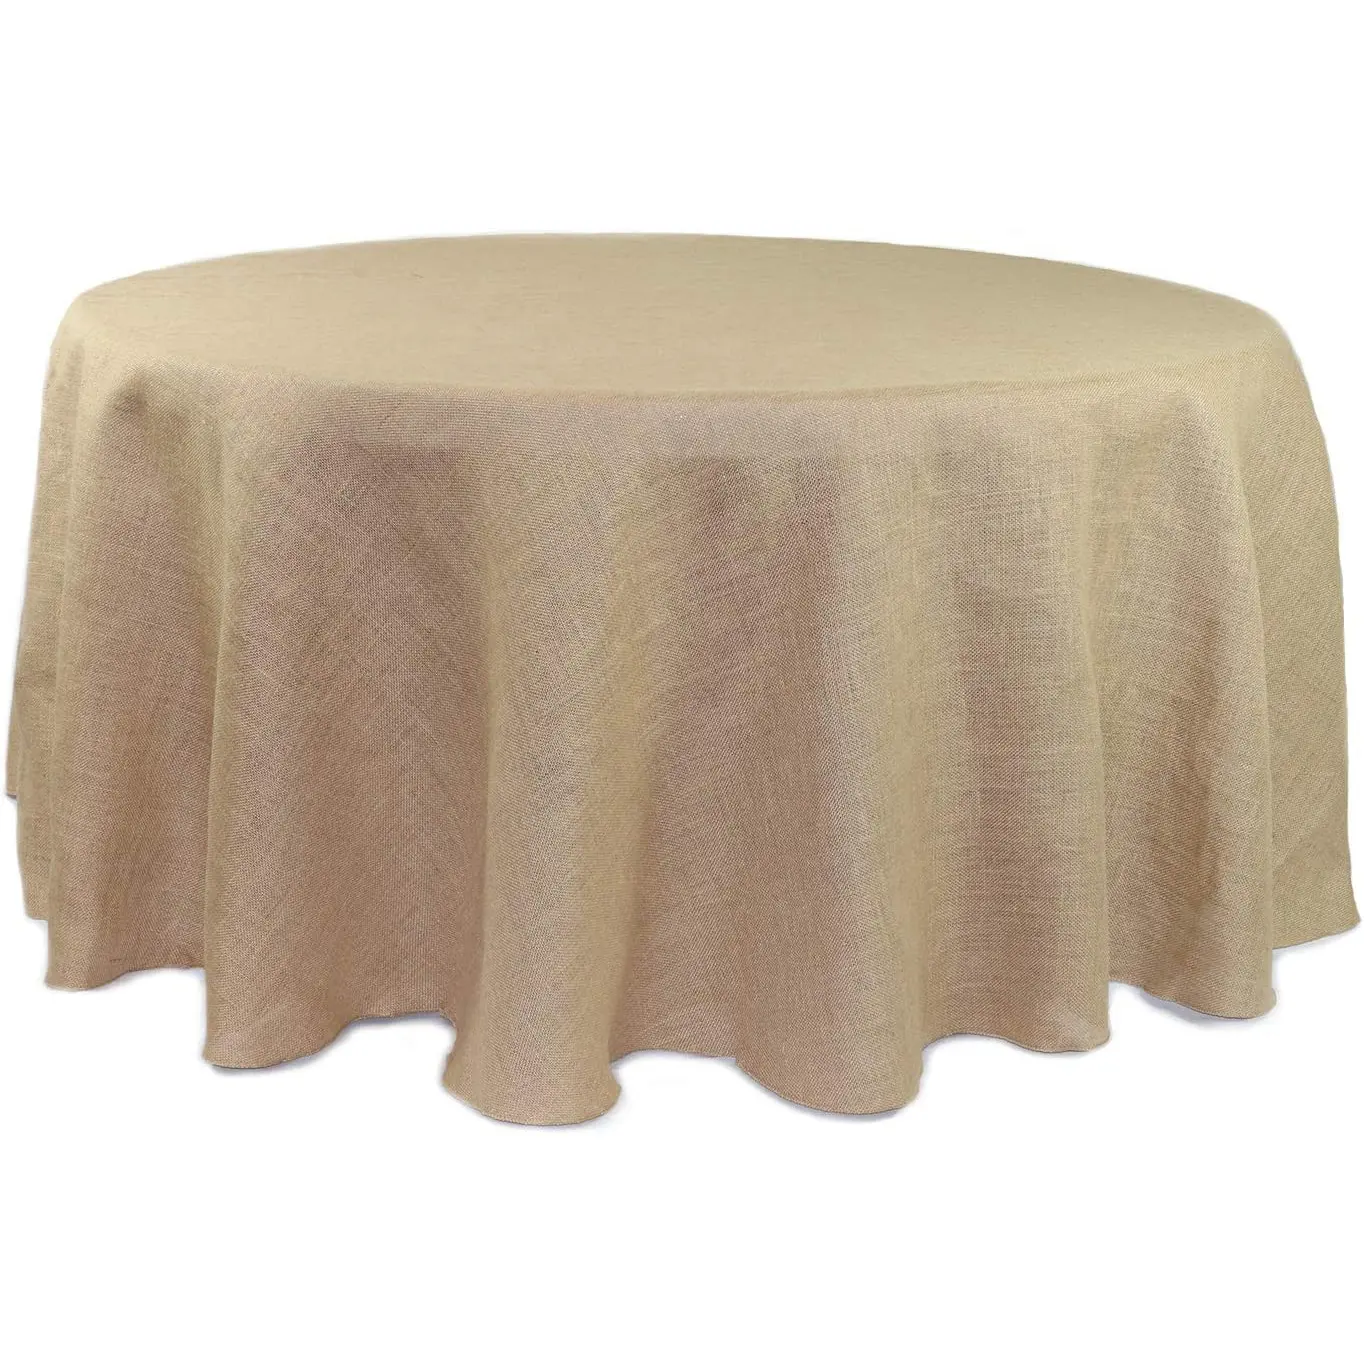 120 Inch Round Burlap Tablecloths Jute Table Cloths For Wedding Party